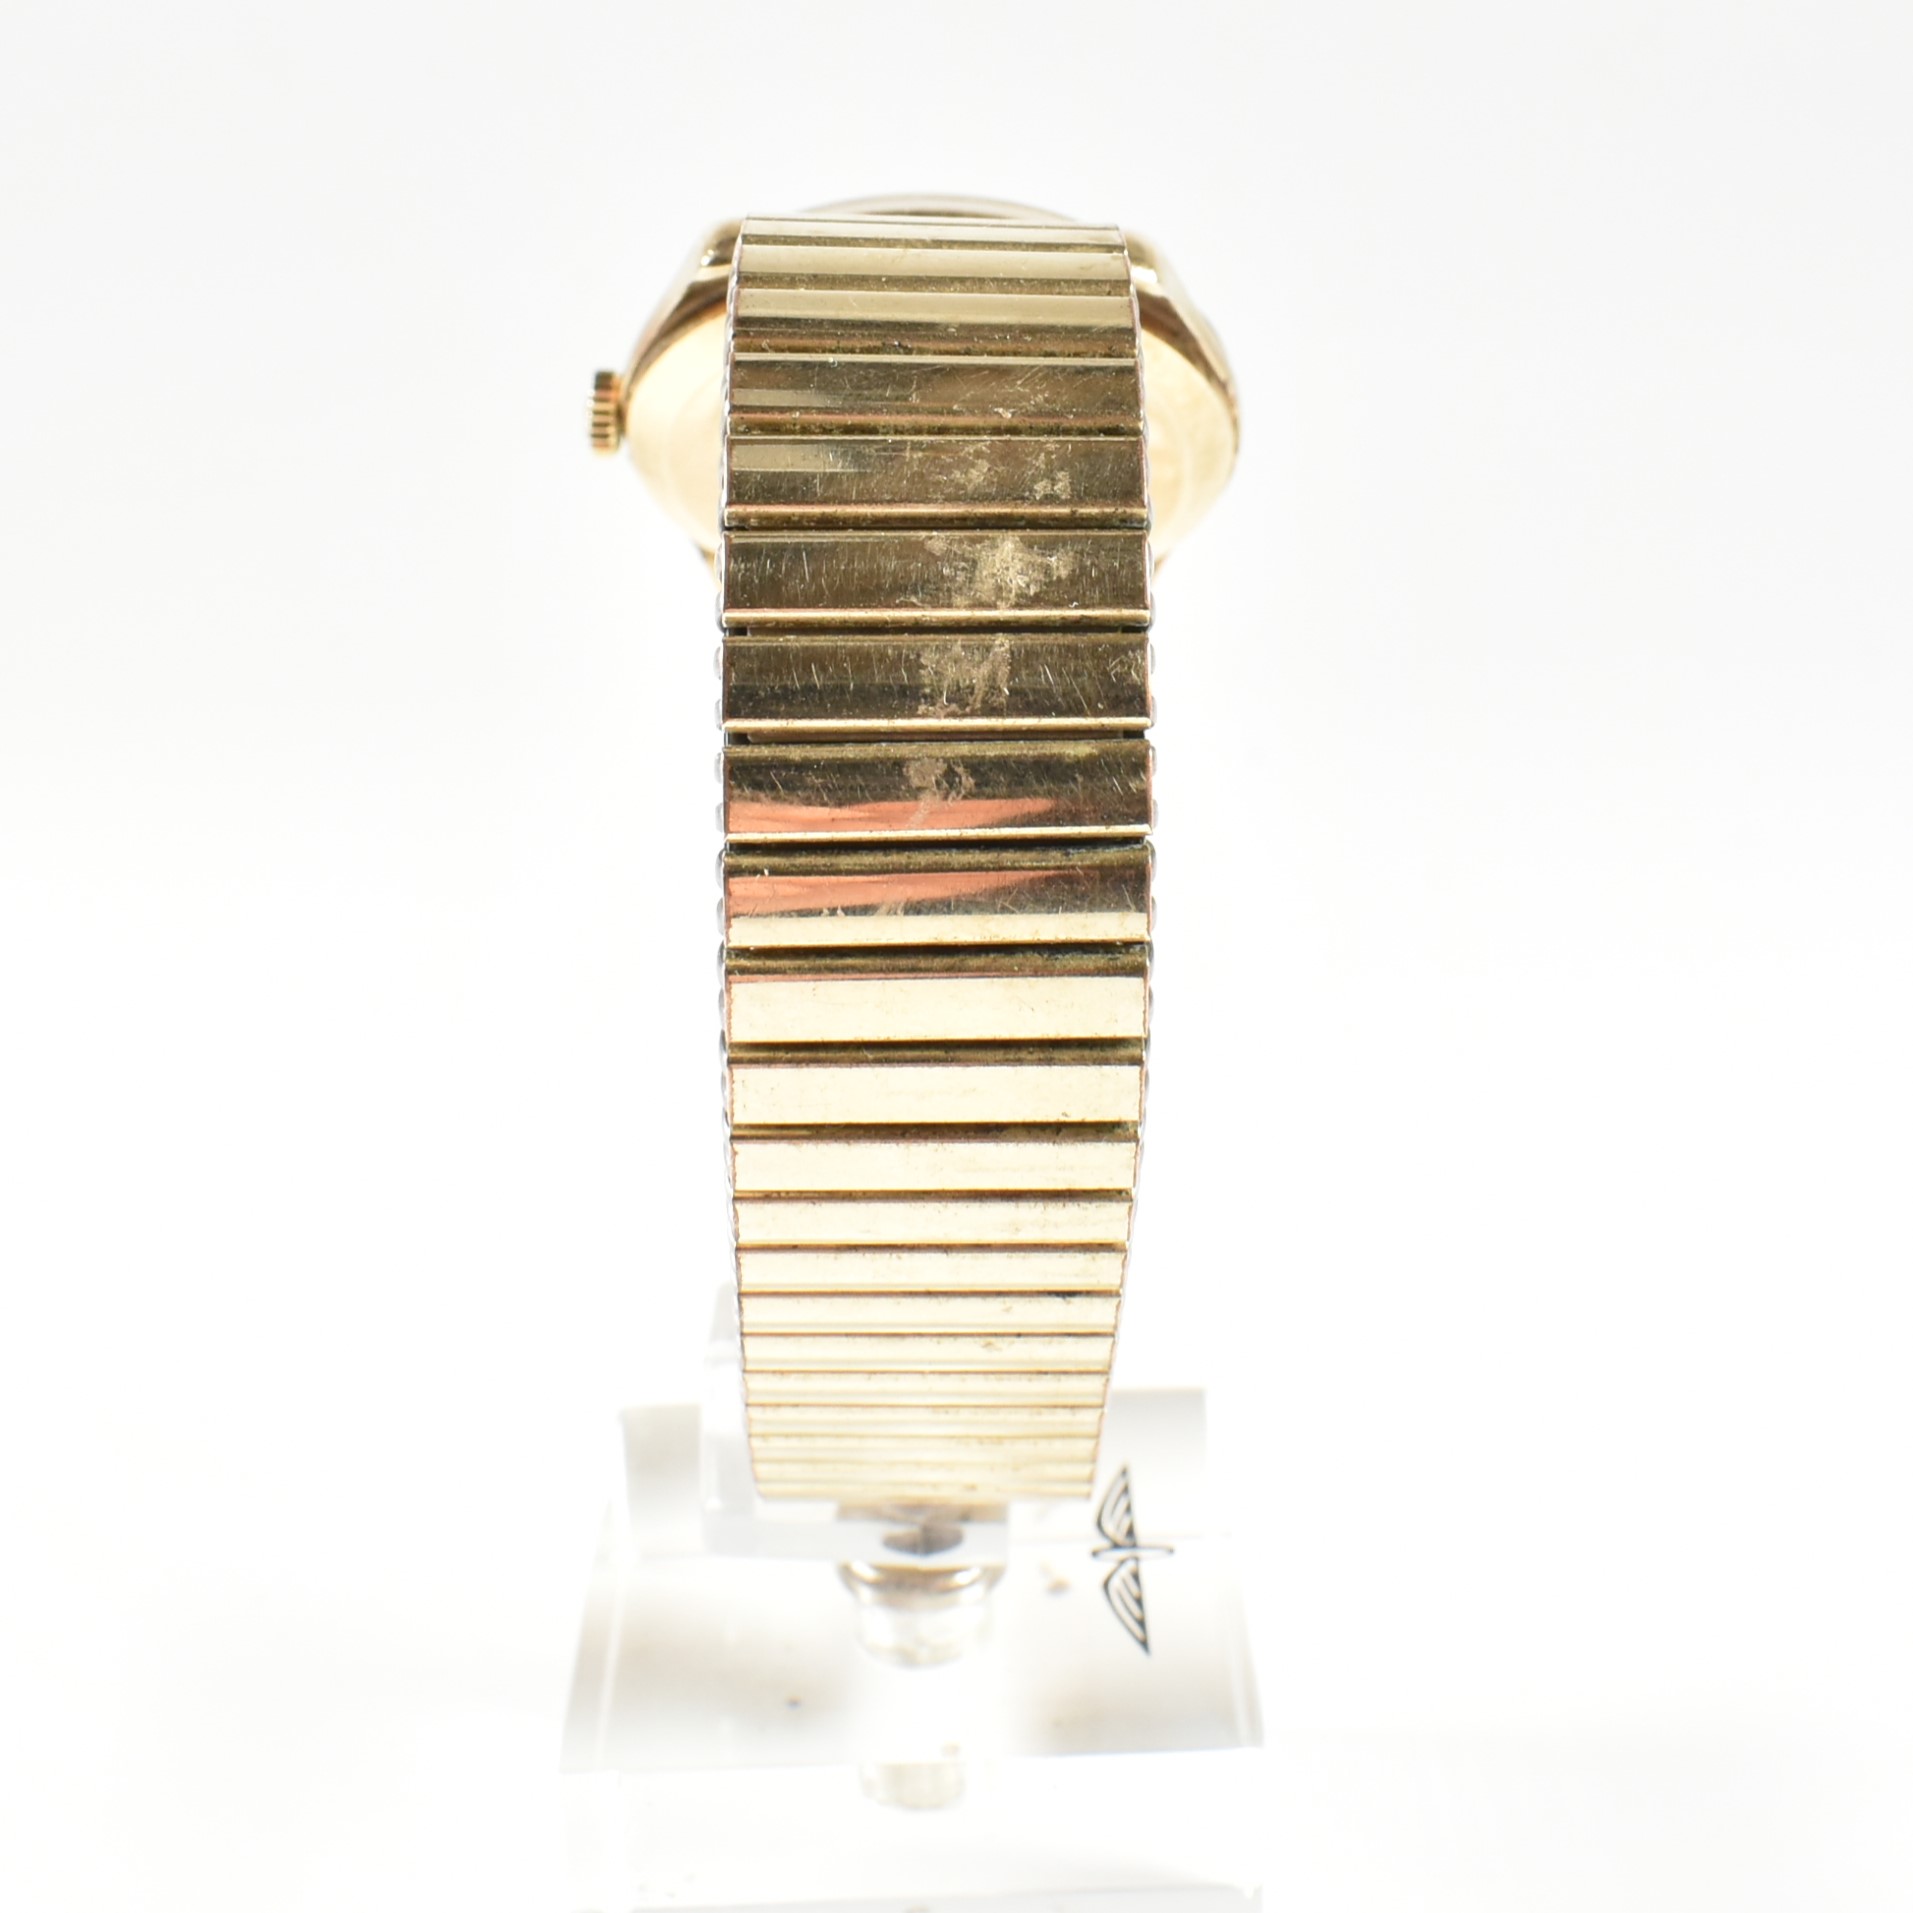 1960S 9CT GOLD OMEGA GENTLEMANS WRISTWATCH - Image 7 of 7